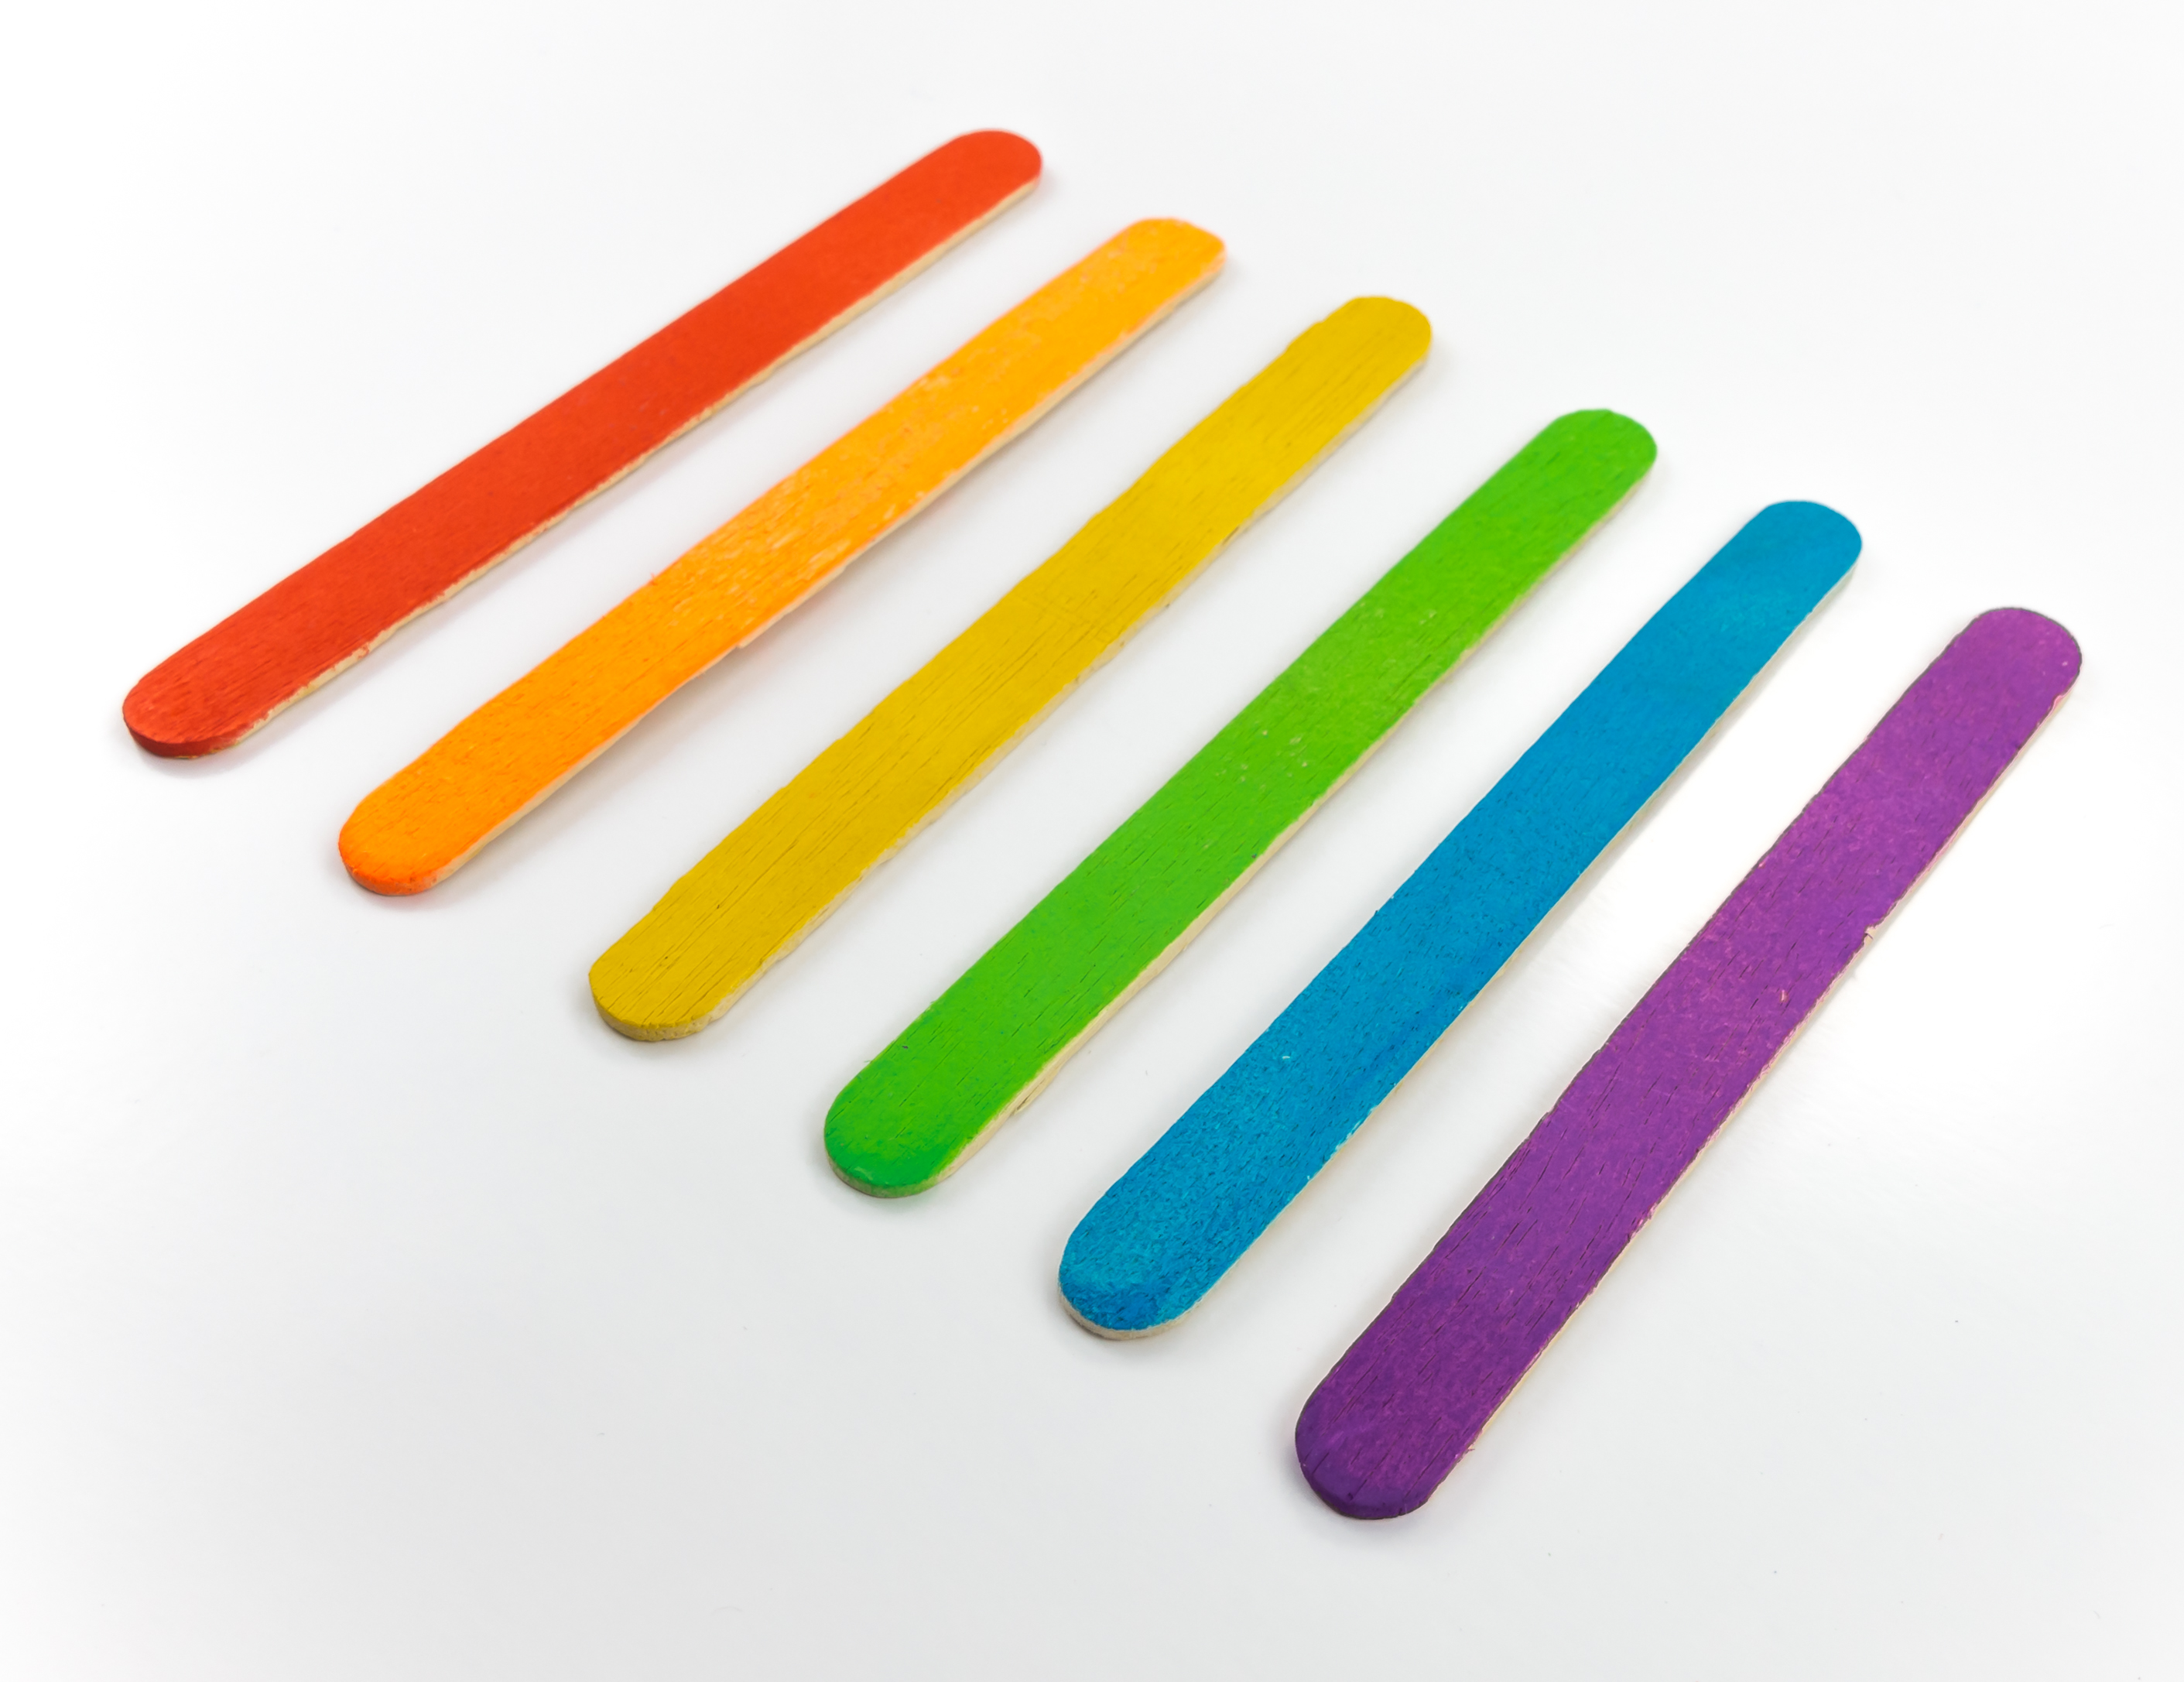 Colorful Ice Cream Sticks for Ealy Education Purposes Isolated on ...